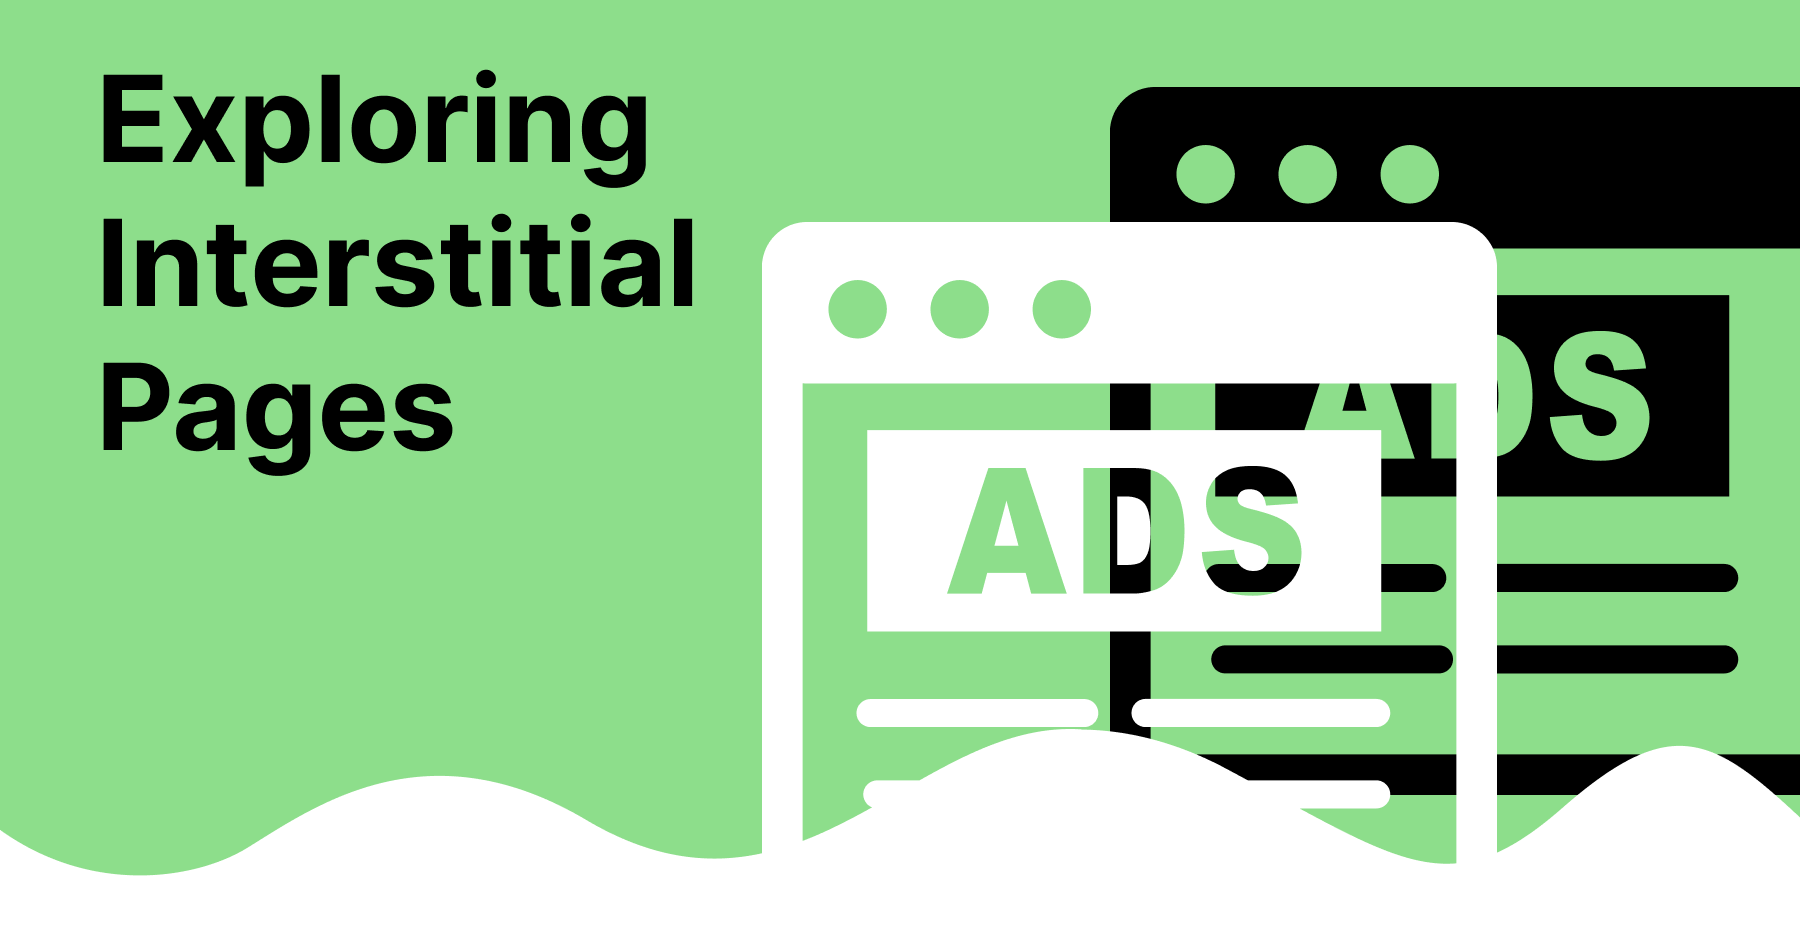 Exploring Interstitial Pages: Enhancing user experience and advertising potential